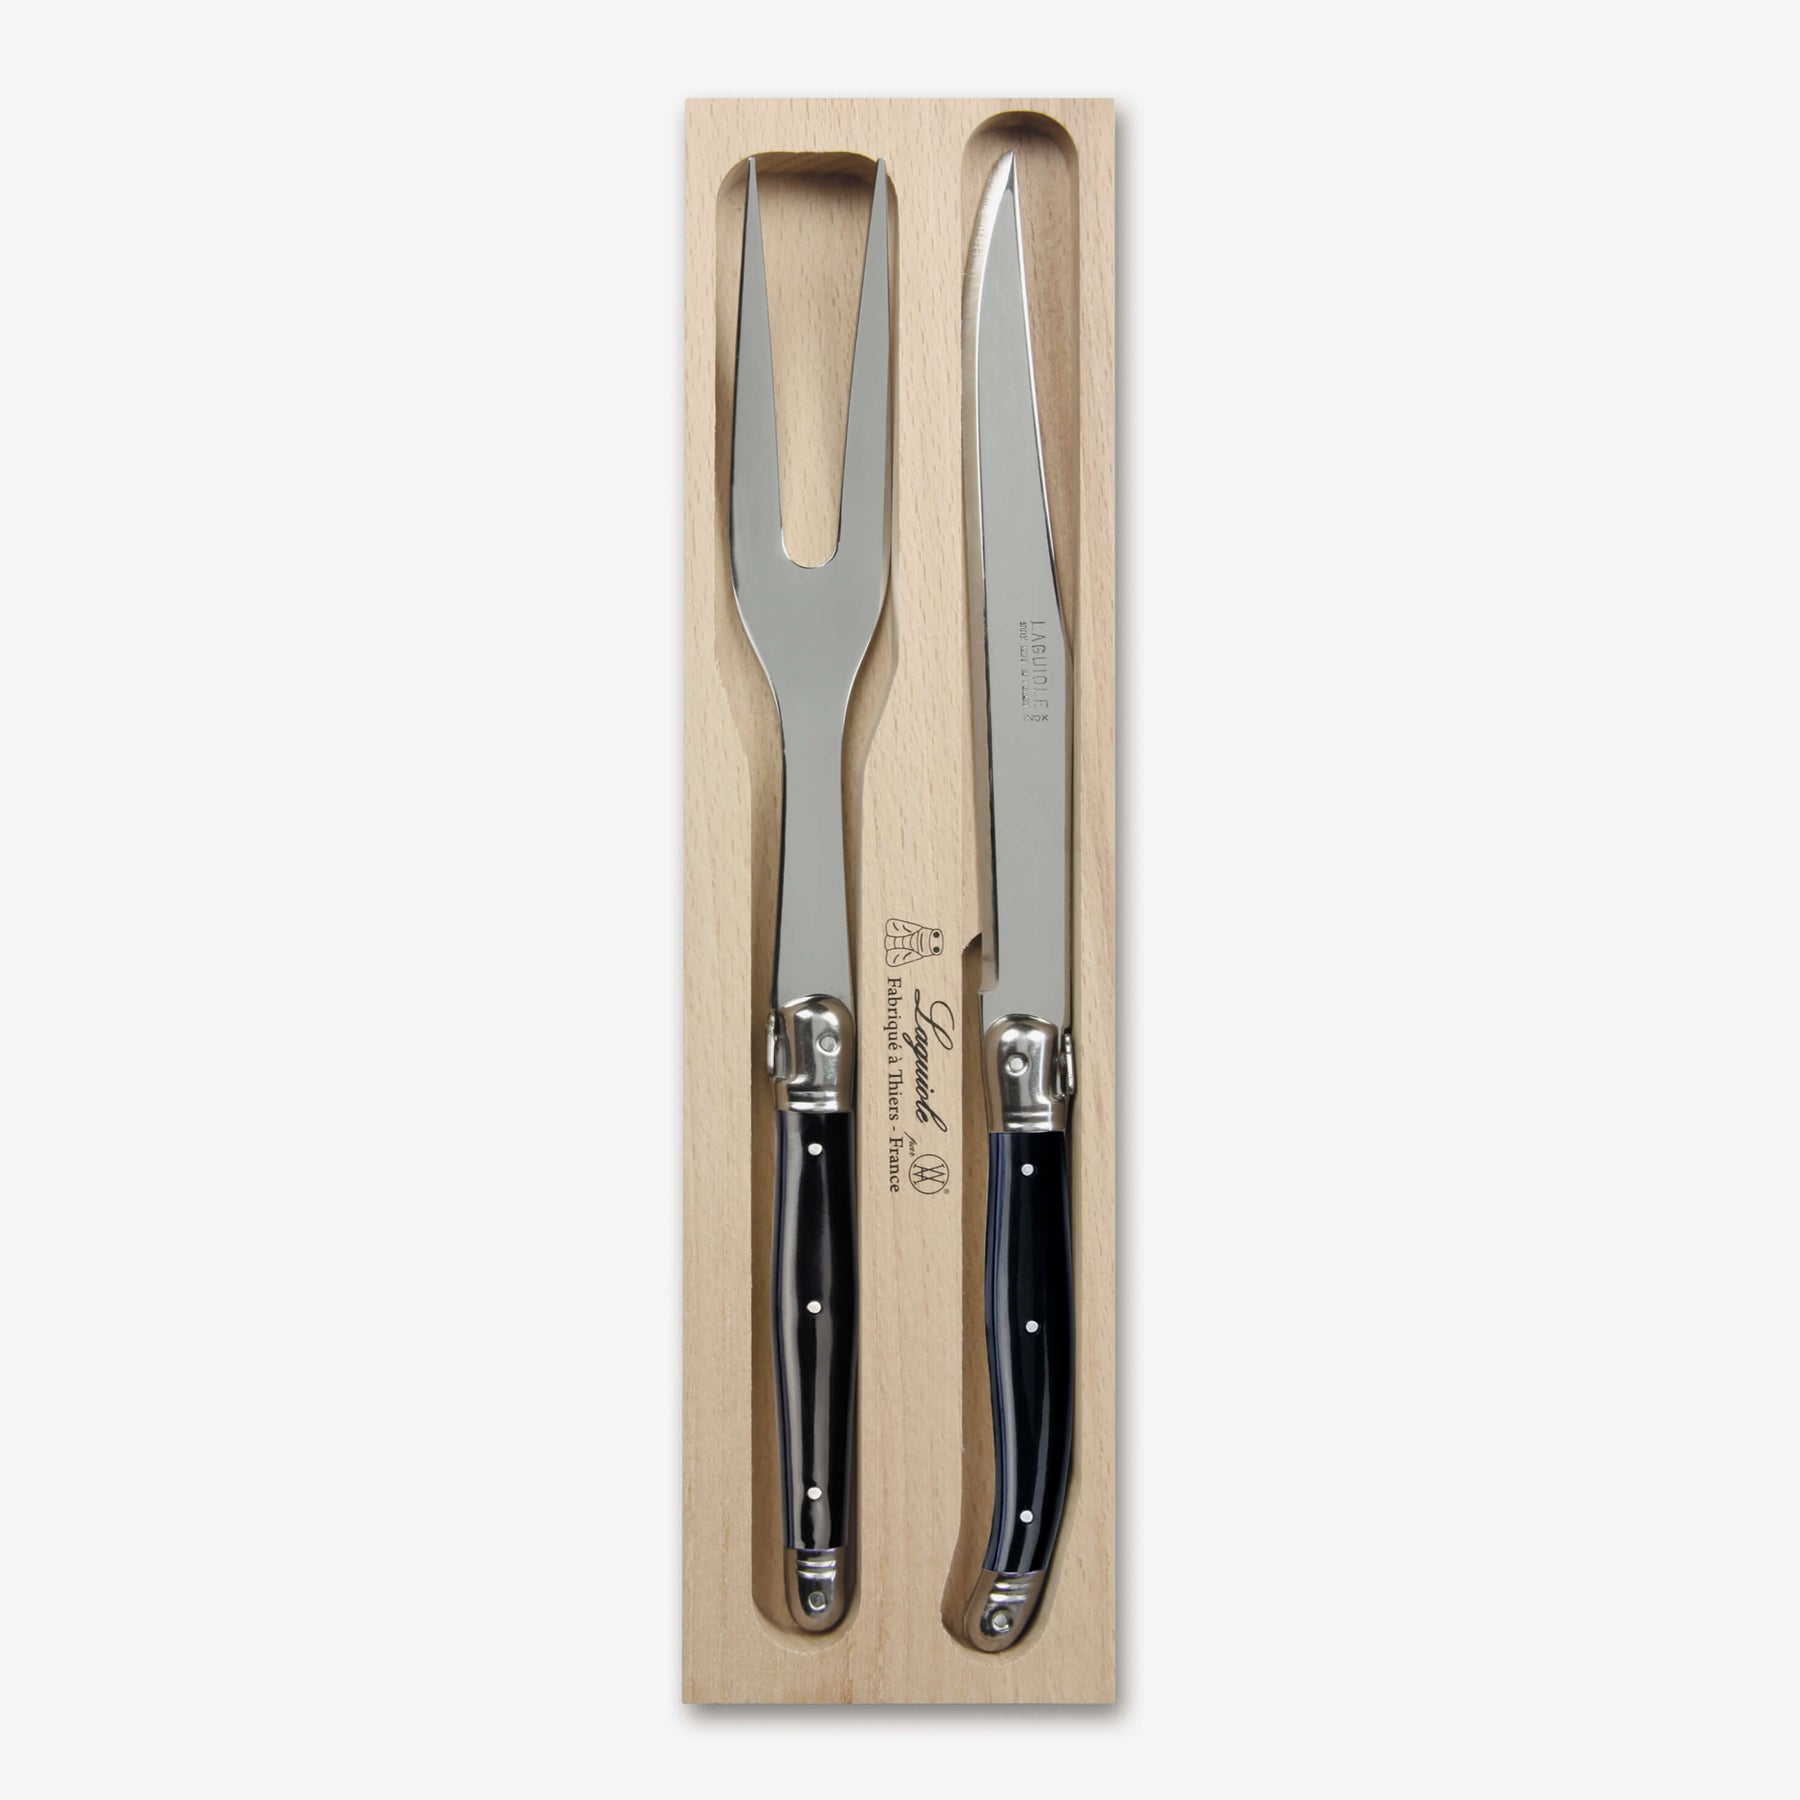 Carving Set in a Tray